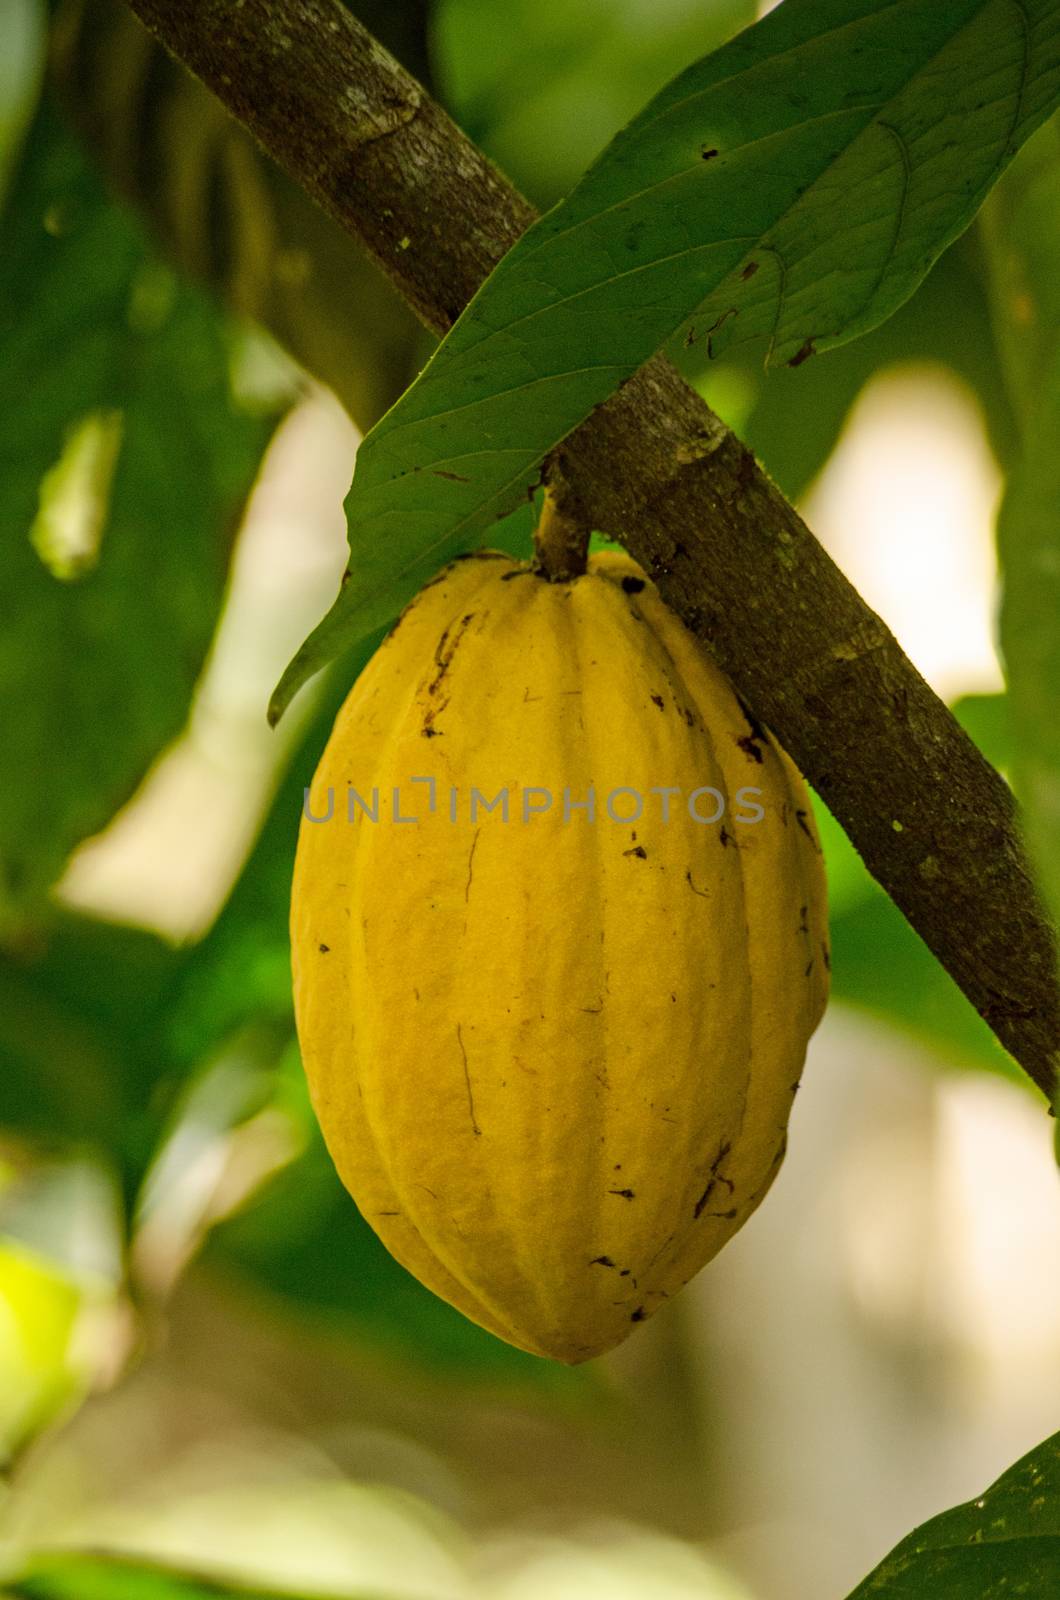 A cacao pod ripening on a tree in the rainforest of Tobago, Trinidad and Tobago.